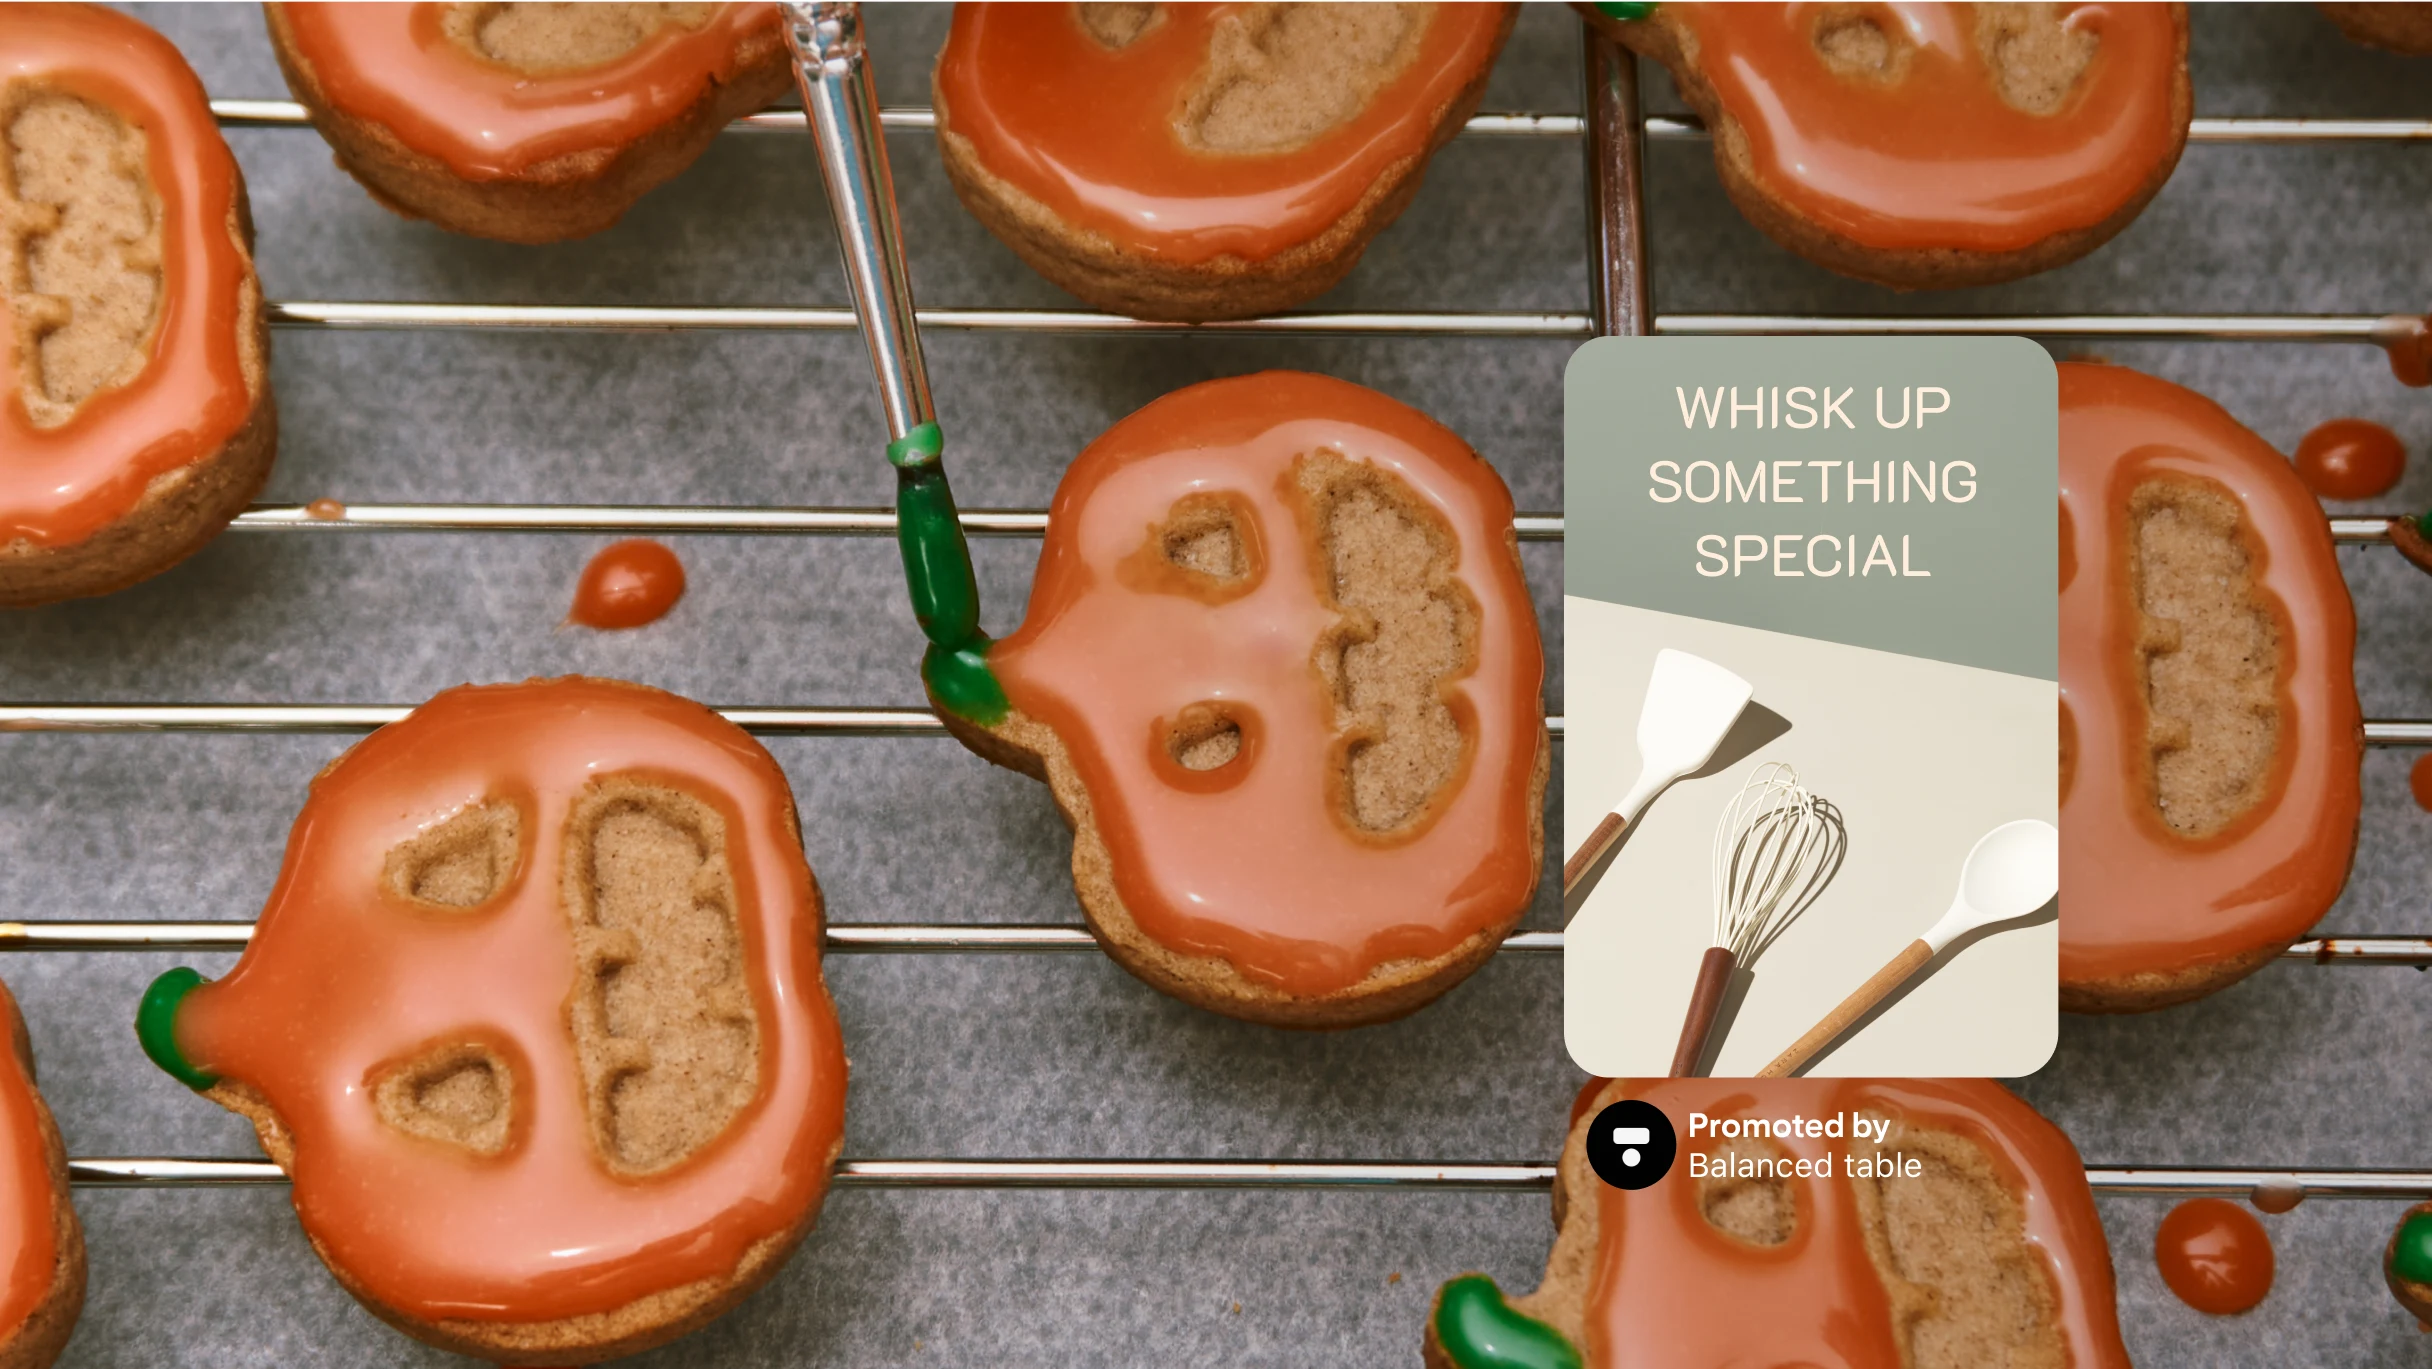 Full width image featuring a tray of cookies decorated as pumpkins, a Pin sits to the right featuring whisks with text “Whisk up something special”.